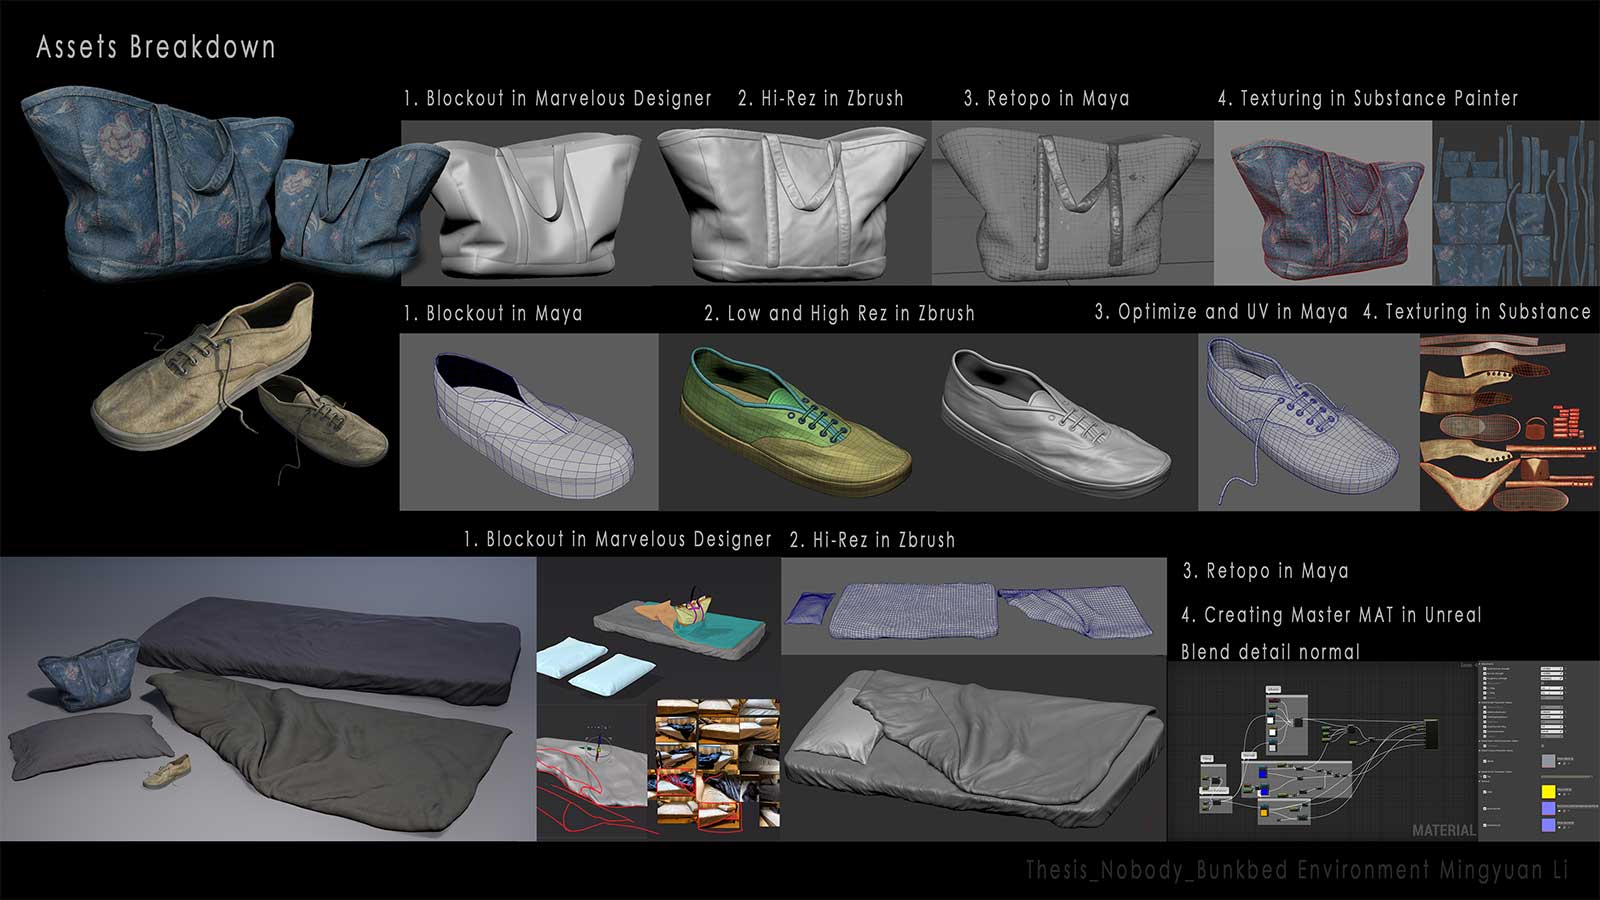 A breakdown of different 3D models.